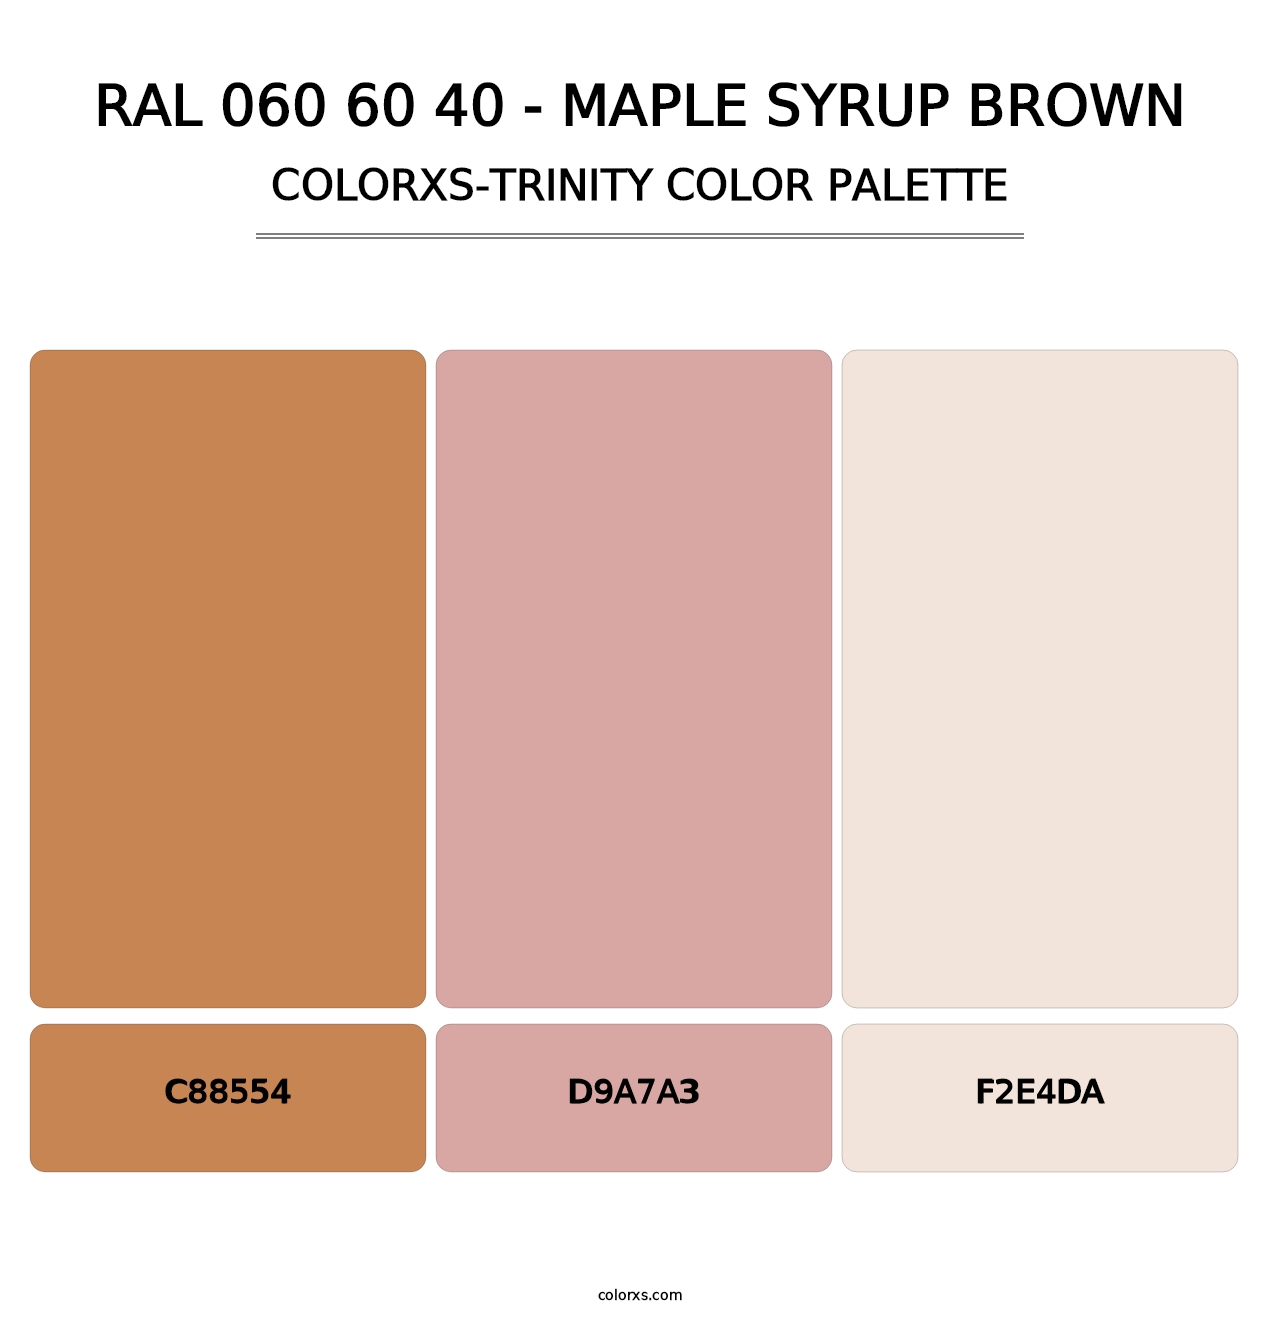 RAL 060 60 40 - Maple Syrup Brown - Colorxs Trinity Palette